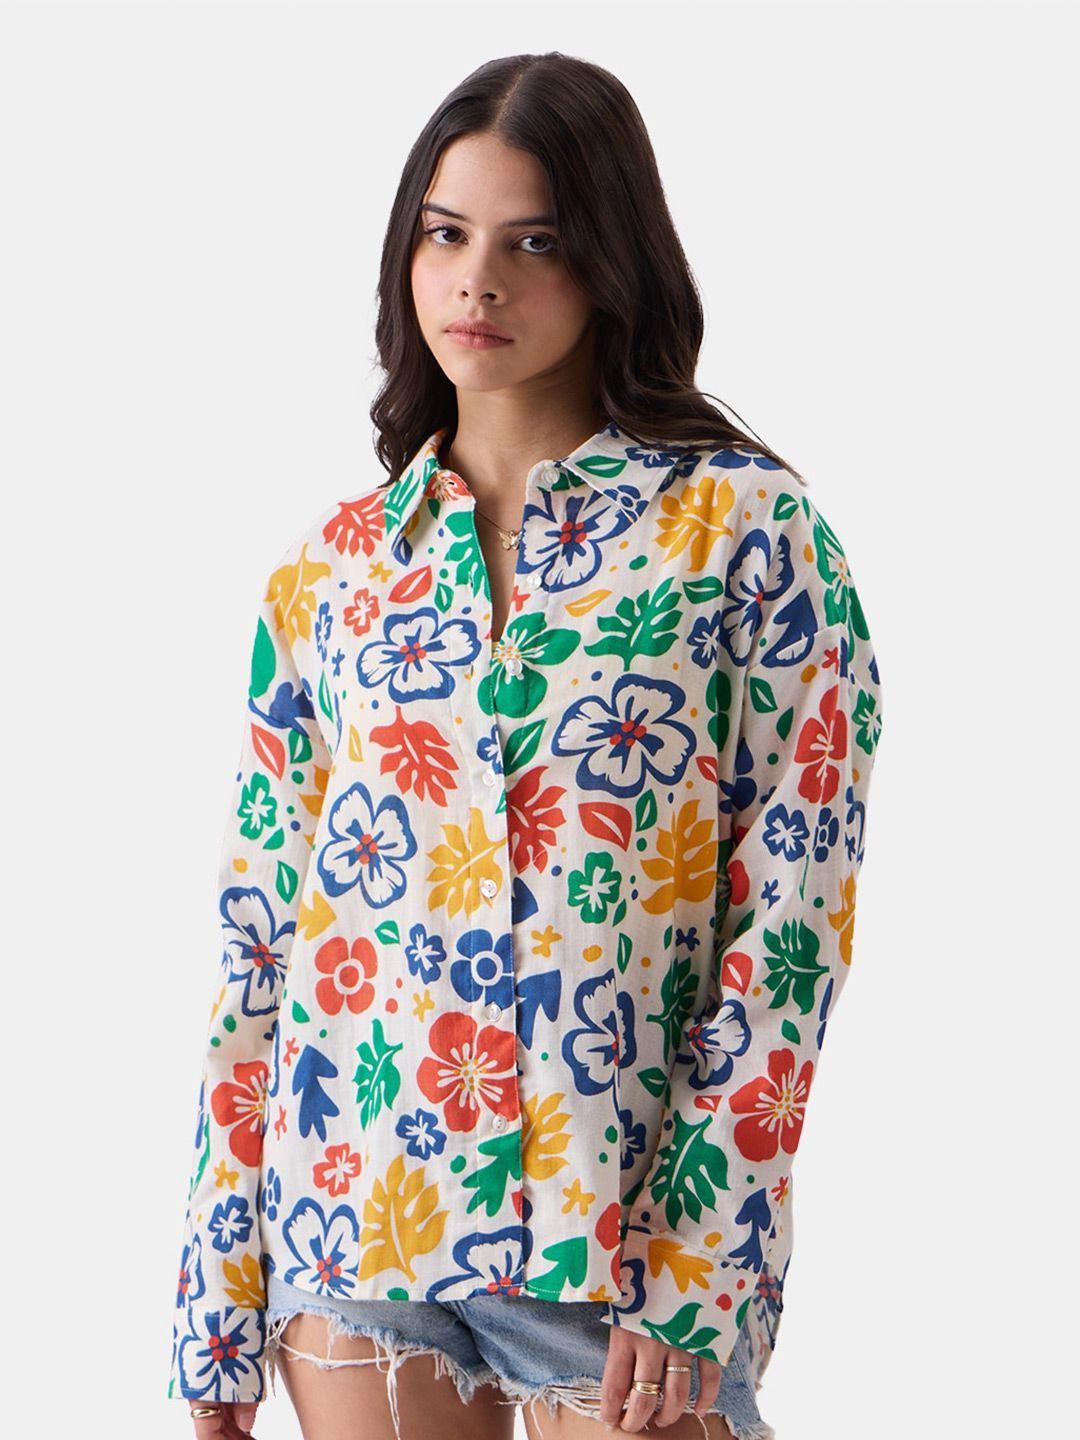 the souled store white relaxed boxy floral printed pure cotton casual shirt